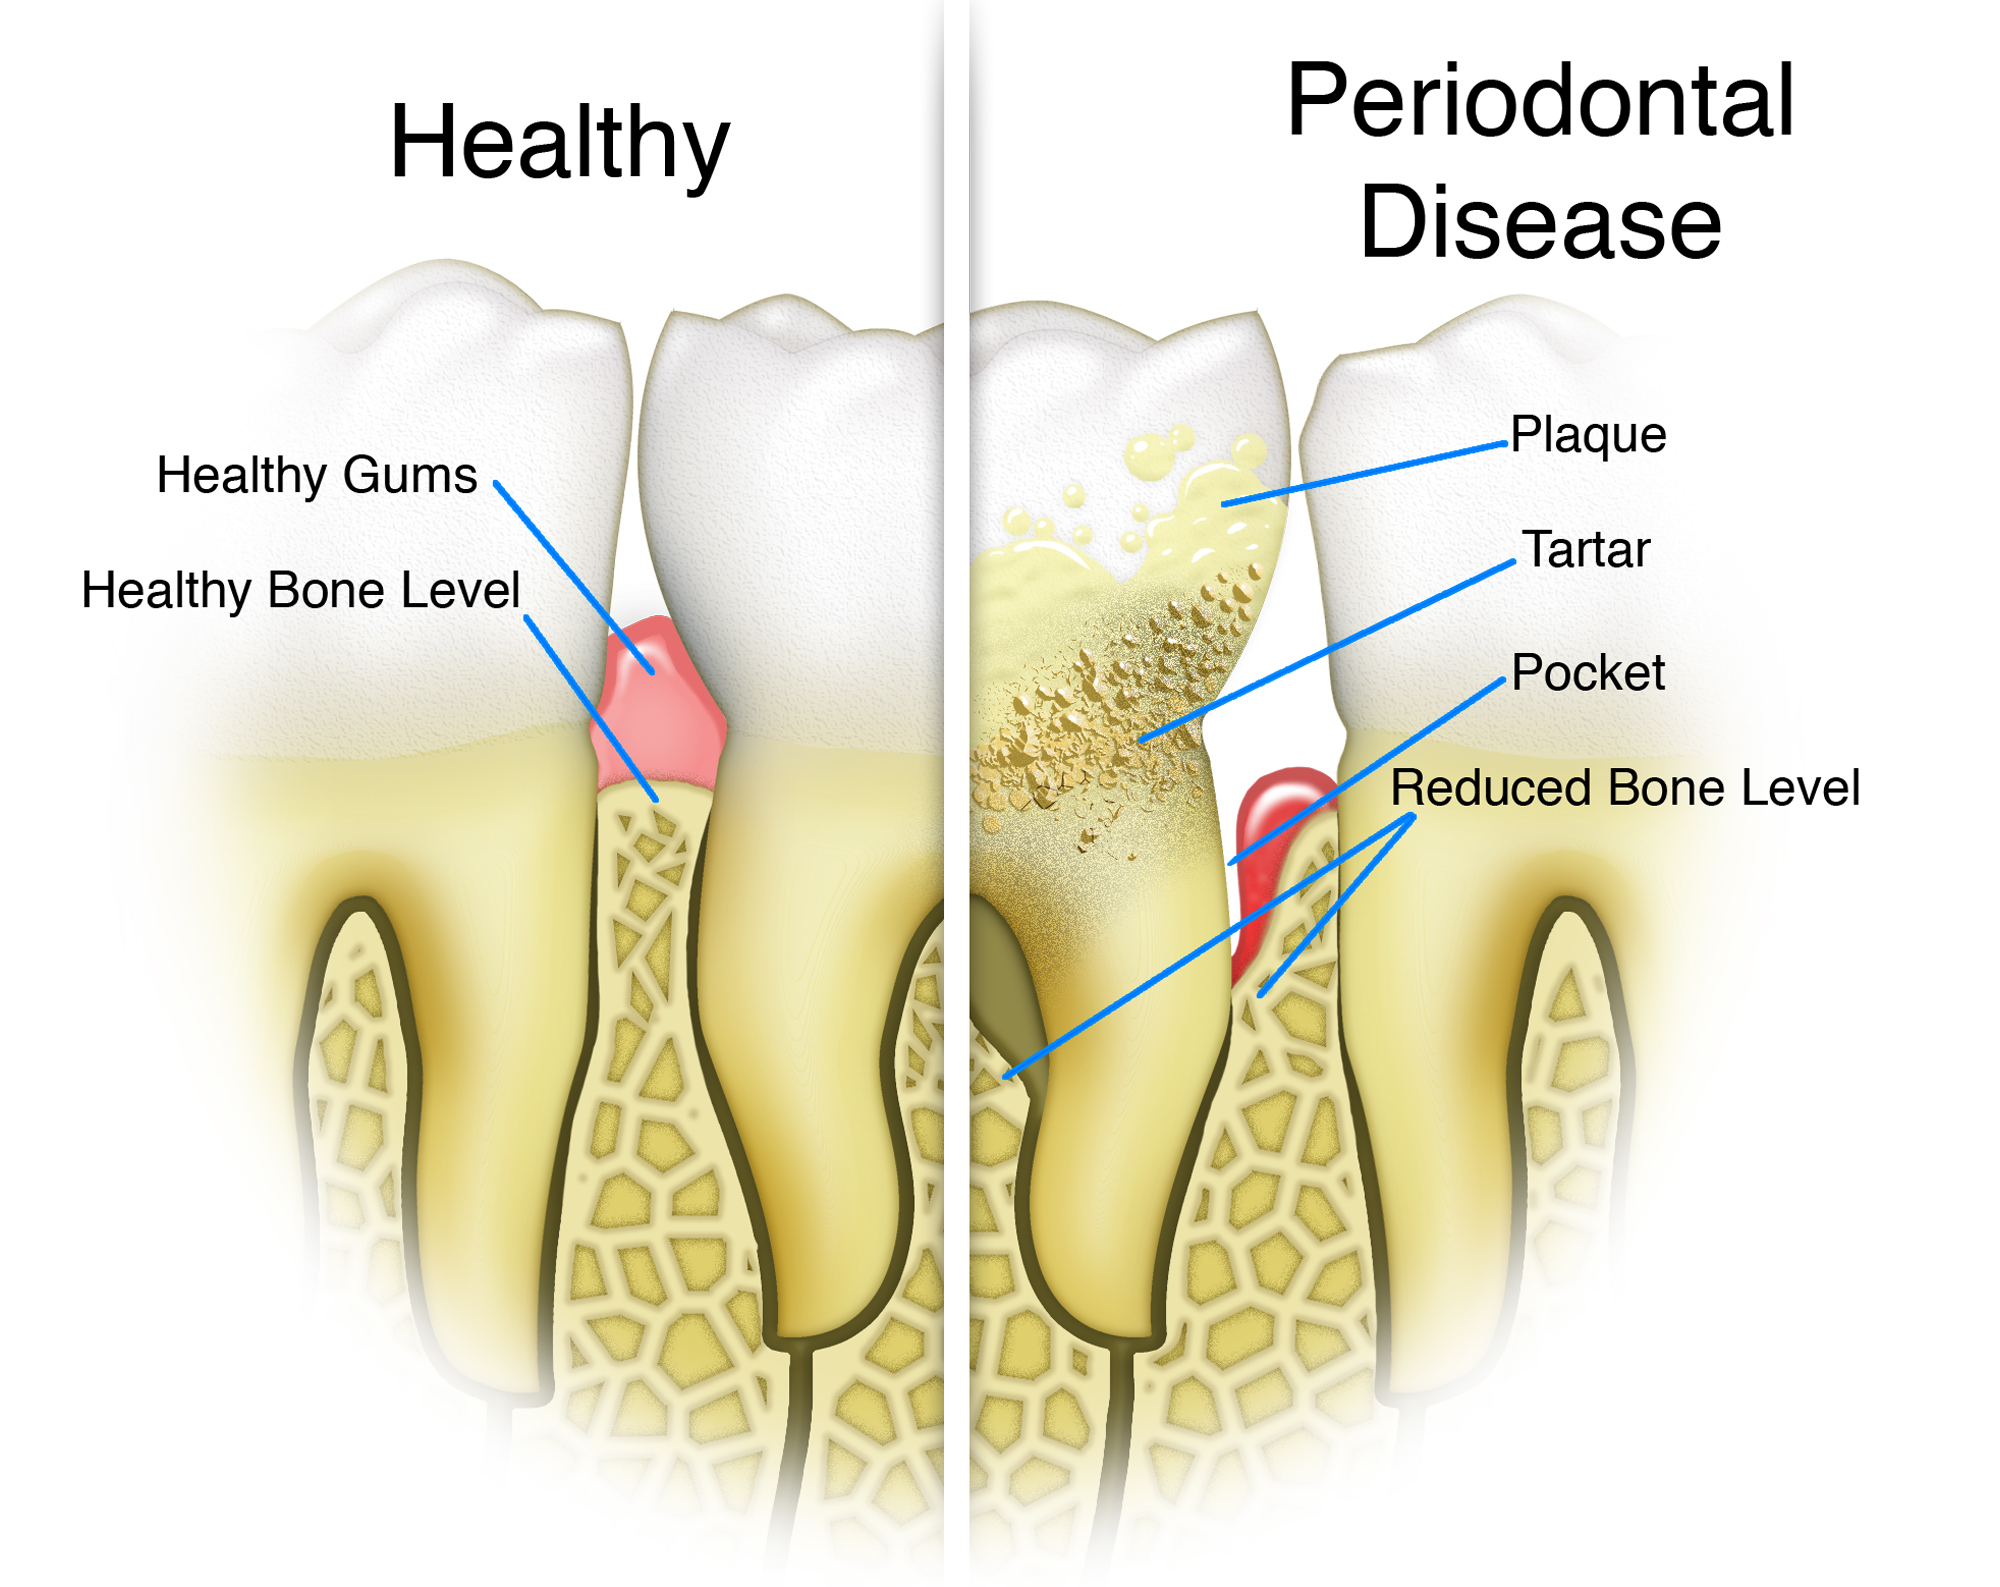 Periodontal Disease: The Painless Path To Tooth Loss